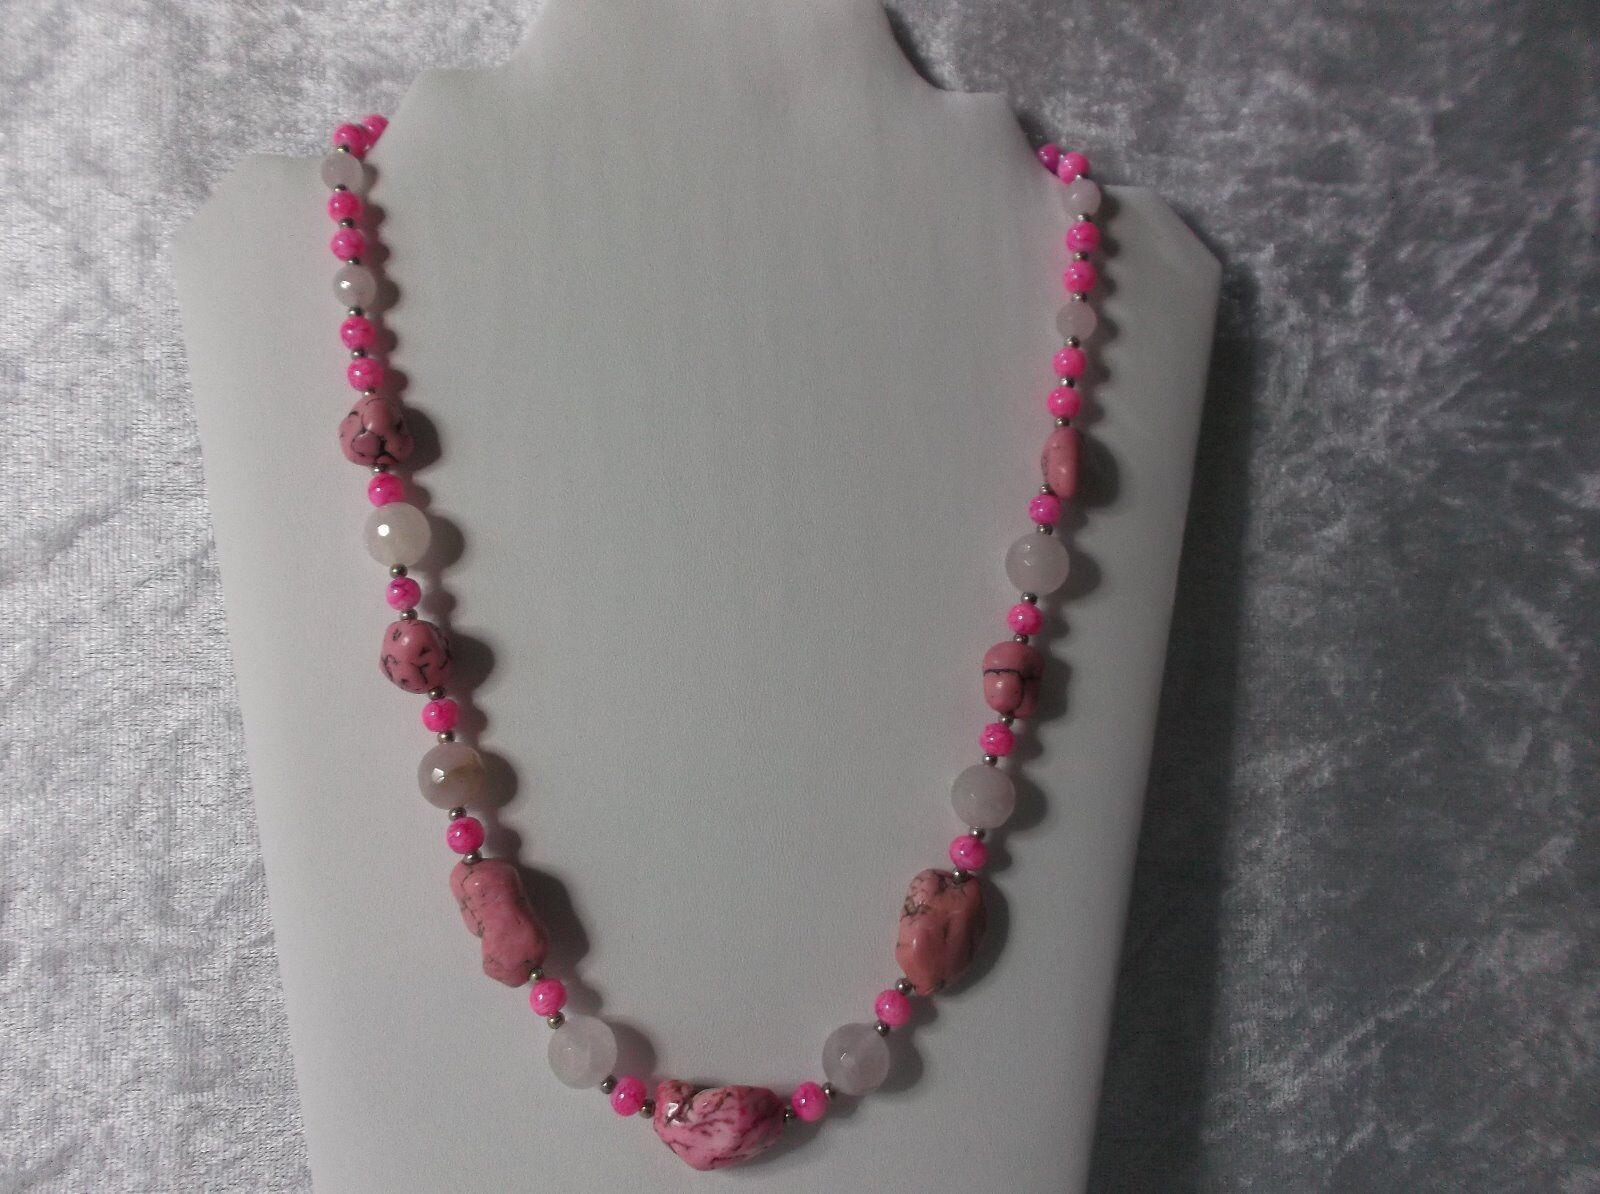 Handmade Rose quartz and (dyed) pink stabilized turquoise necklace